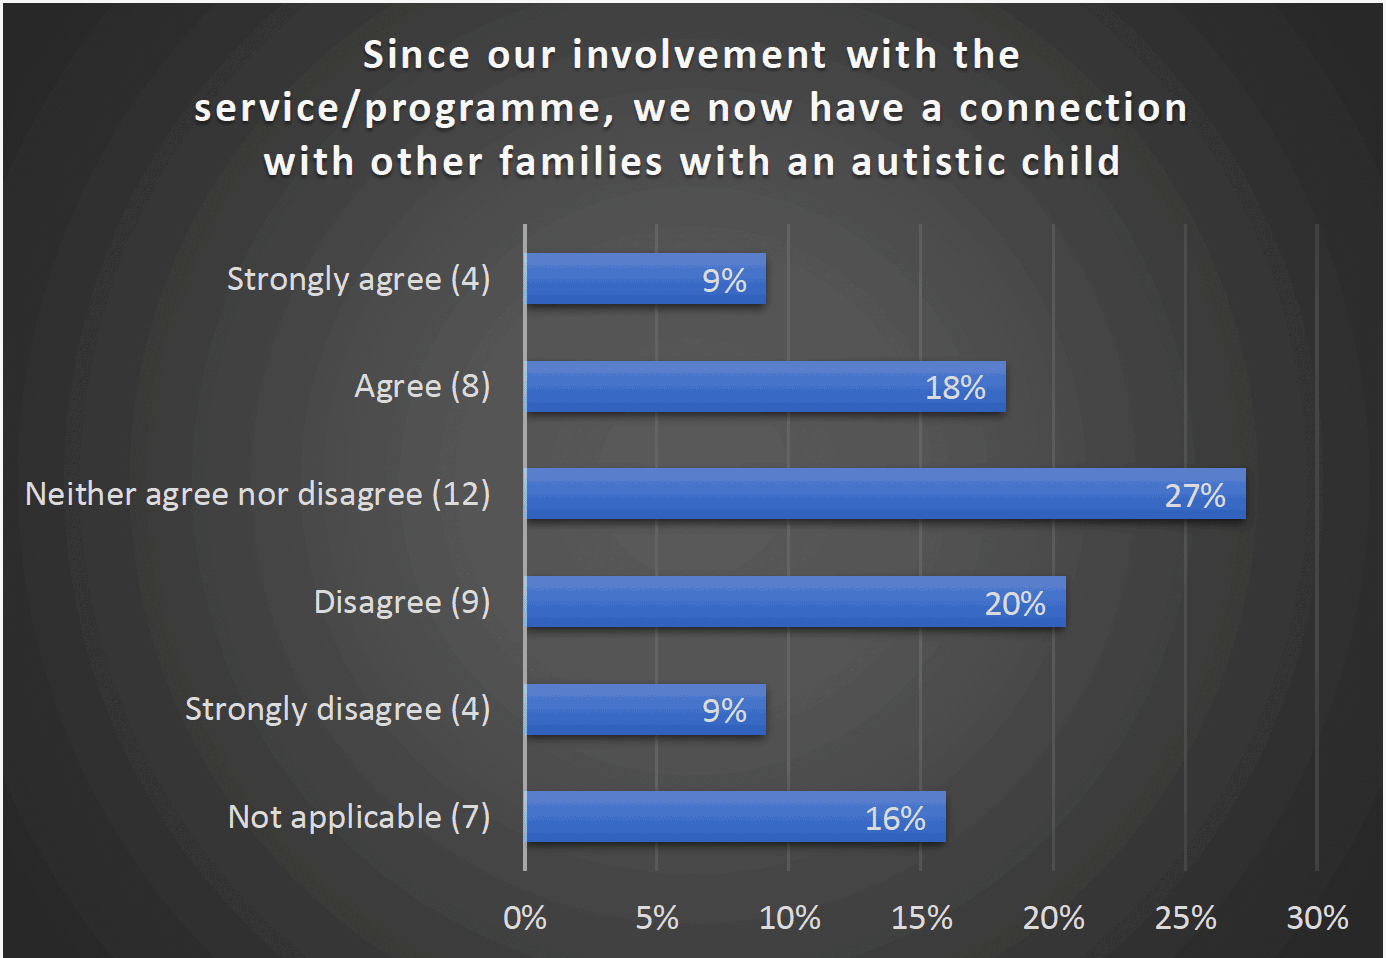 Since our involvement with the service/programme, we now have a connection with other families with an autistic child - Strongly agree (4) 9%, Agree (8) 18%, Neither agree nor disagree (12) 27%, Disagree (9) 20%, Strongly disagree (4) 9%, Not applicable (7) 16%